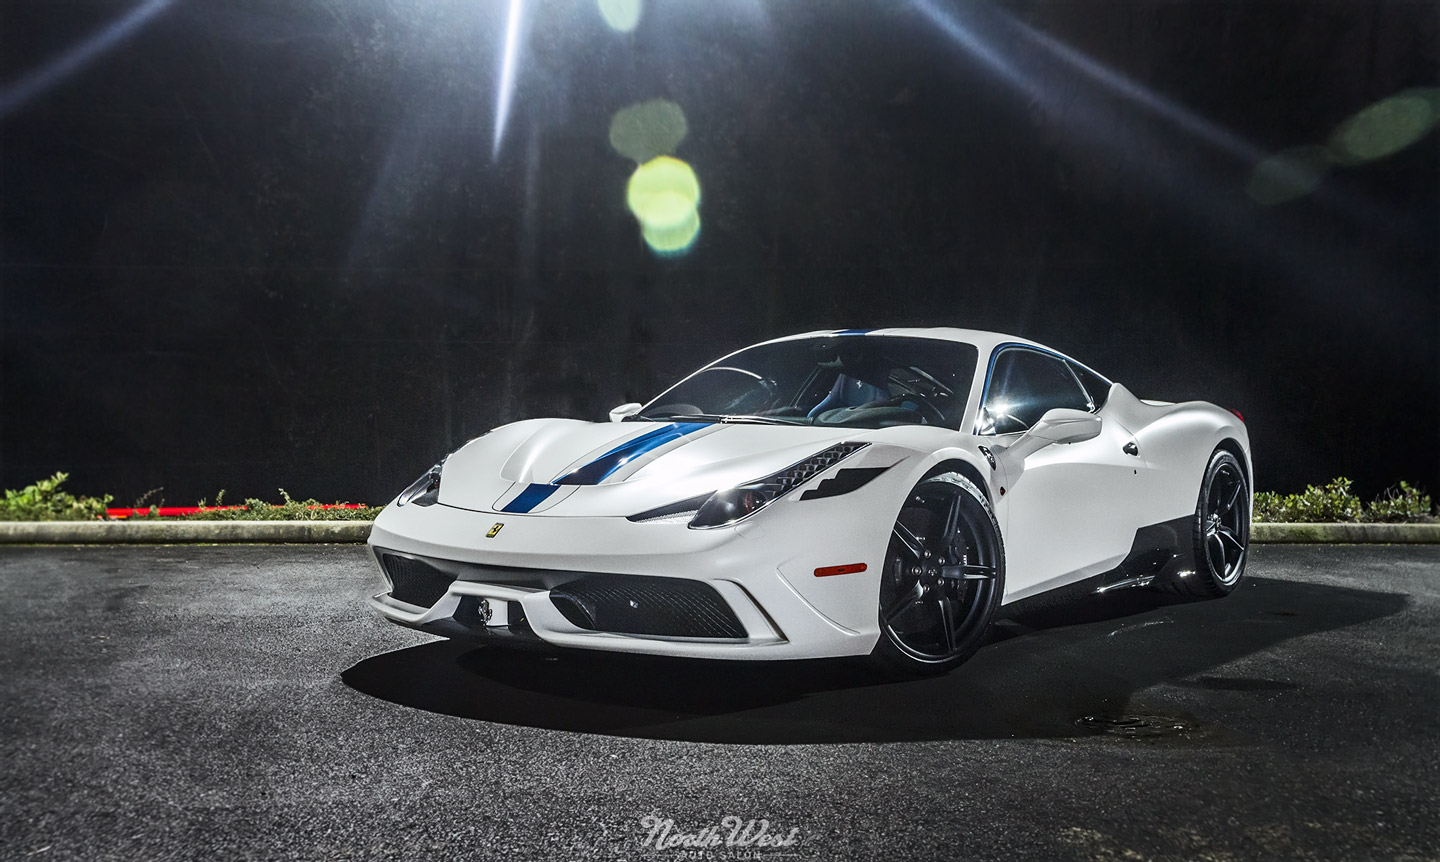 XPEL Stealth wrapped Ferrari 458 Speciale